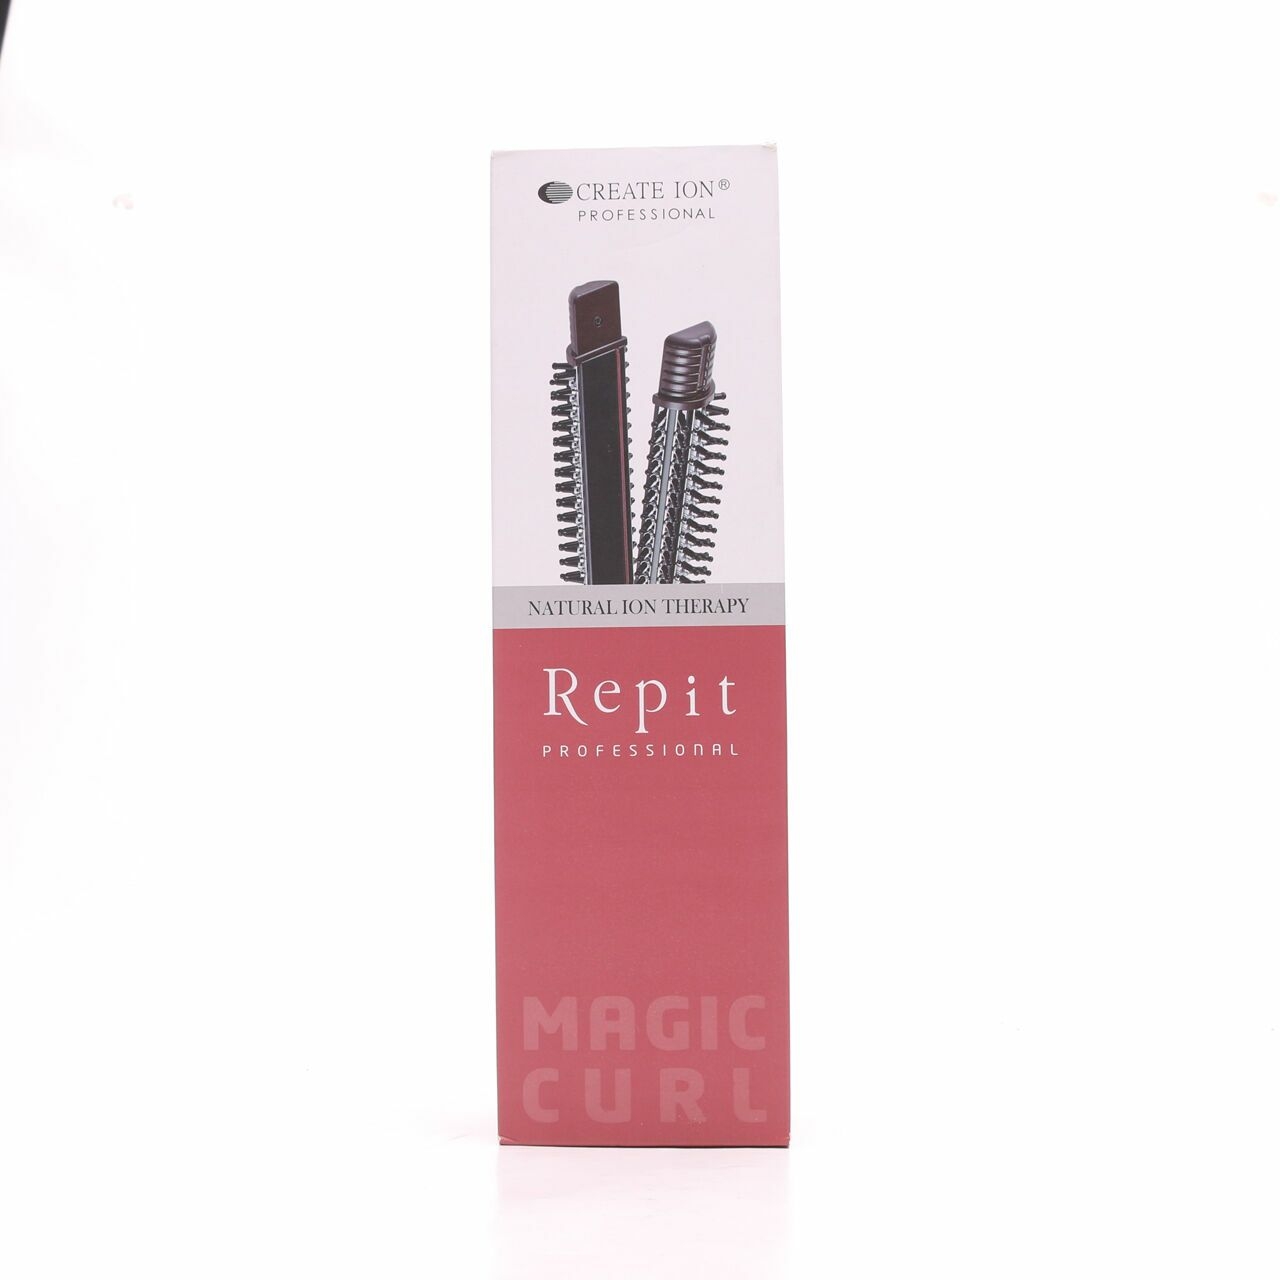 Repit Natural Ion Therapy Magic Curl